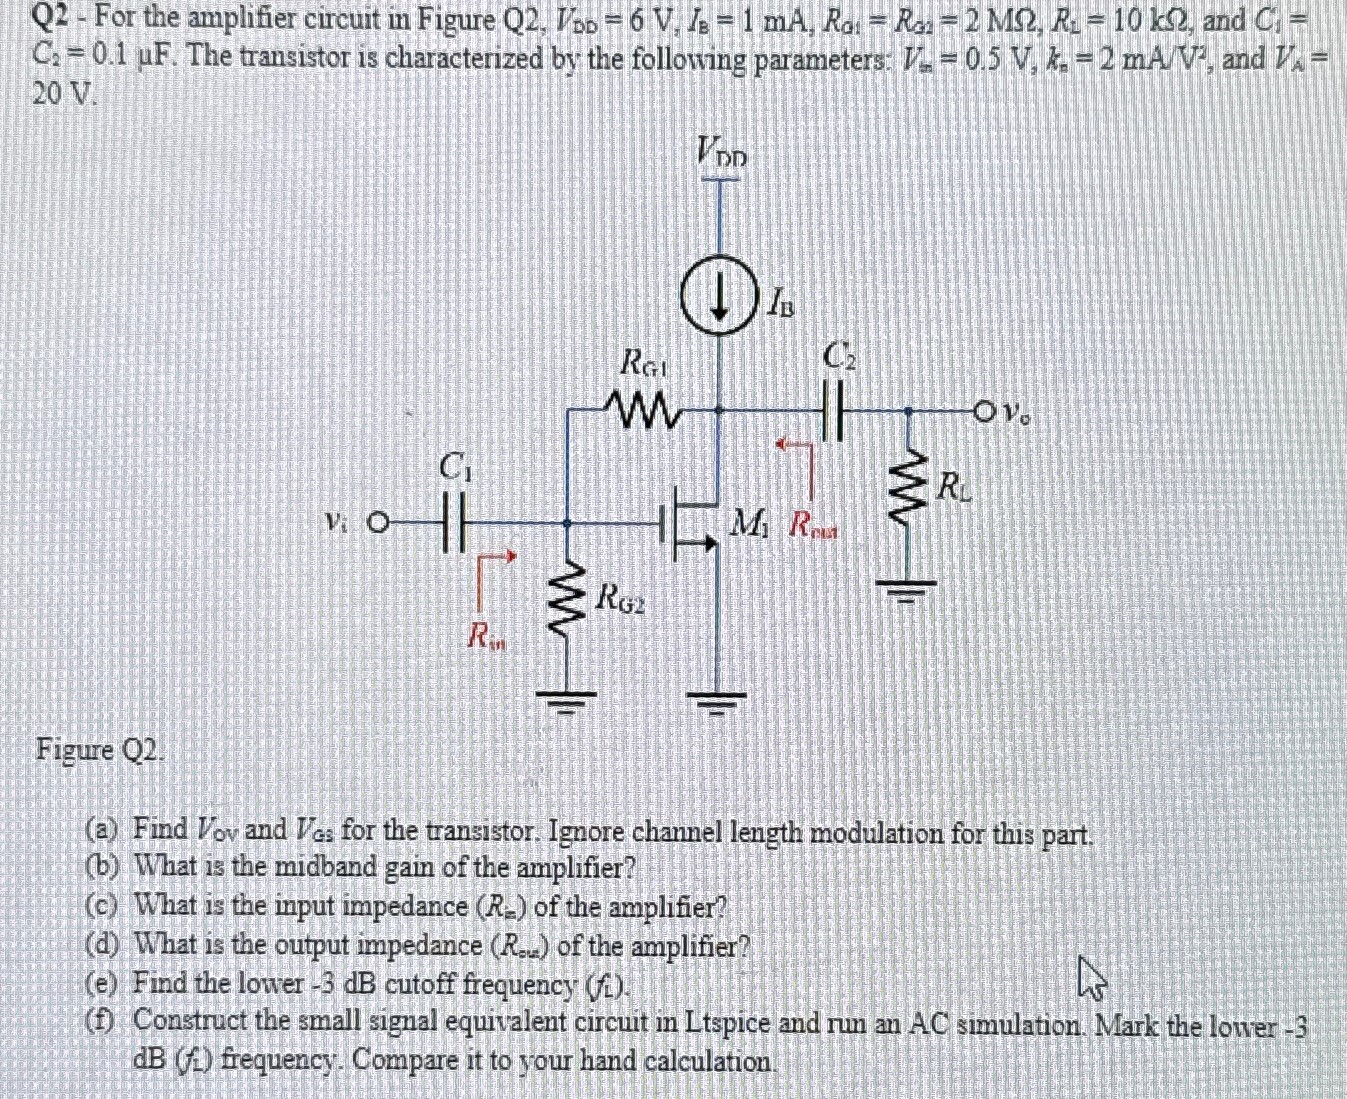 Q2 - For the amplifier circuit in Figure Q2, VDD = 6 V, IB = 1 mA, RG1 = RG2 = 2 MΩ, RL = 10 kΩ, and CA = C2 = 0.1 μF. The transistor is characterized by the following parameters. Vs = 0.5 V, kn = 2 mA/V2, and VA = 20 V Figure Q2. (a) Find Vov and VGs for the transistor. Ignore channel length modulation for this part. (b) What is the midband gain of the amplifier? (c) What is the input impedance (Rm) of the amplifier? (d) What is the output impedance (Ro) of the amplifier? (e) Find the lower −3 dB cutoff frequency (fL). (f) Construct the small signal equivalent circuit in Ltspice and run an AC simulation. Mark the lower -3 dB(f1) frequency. Compare it to your hand calculation. 